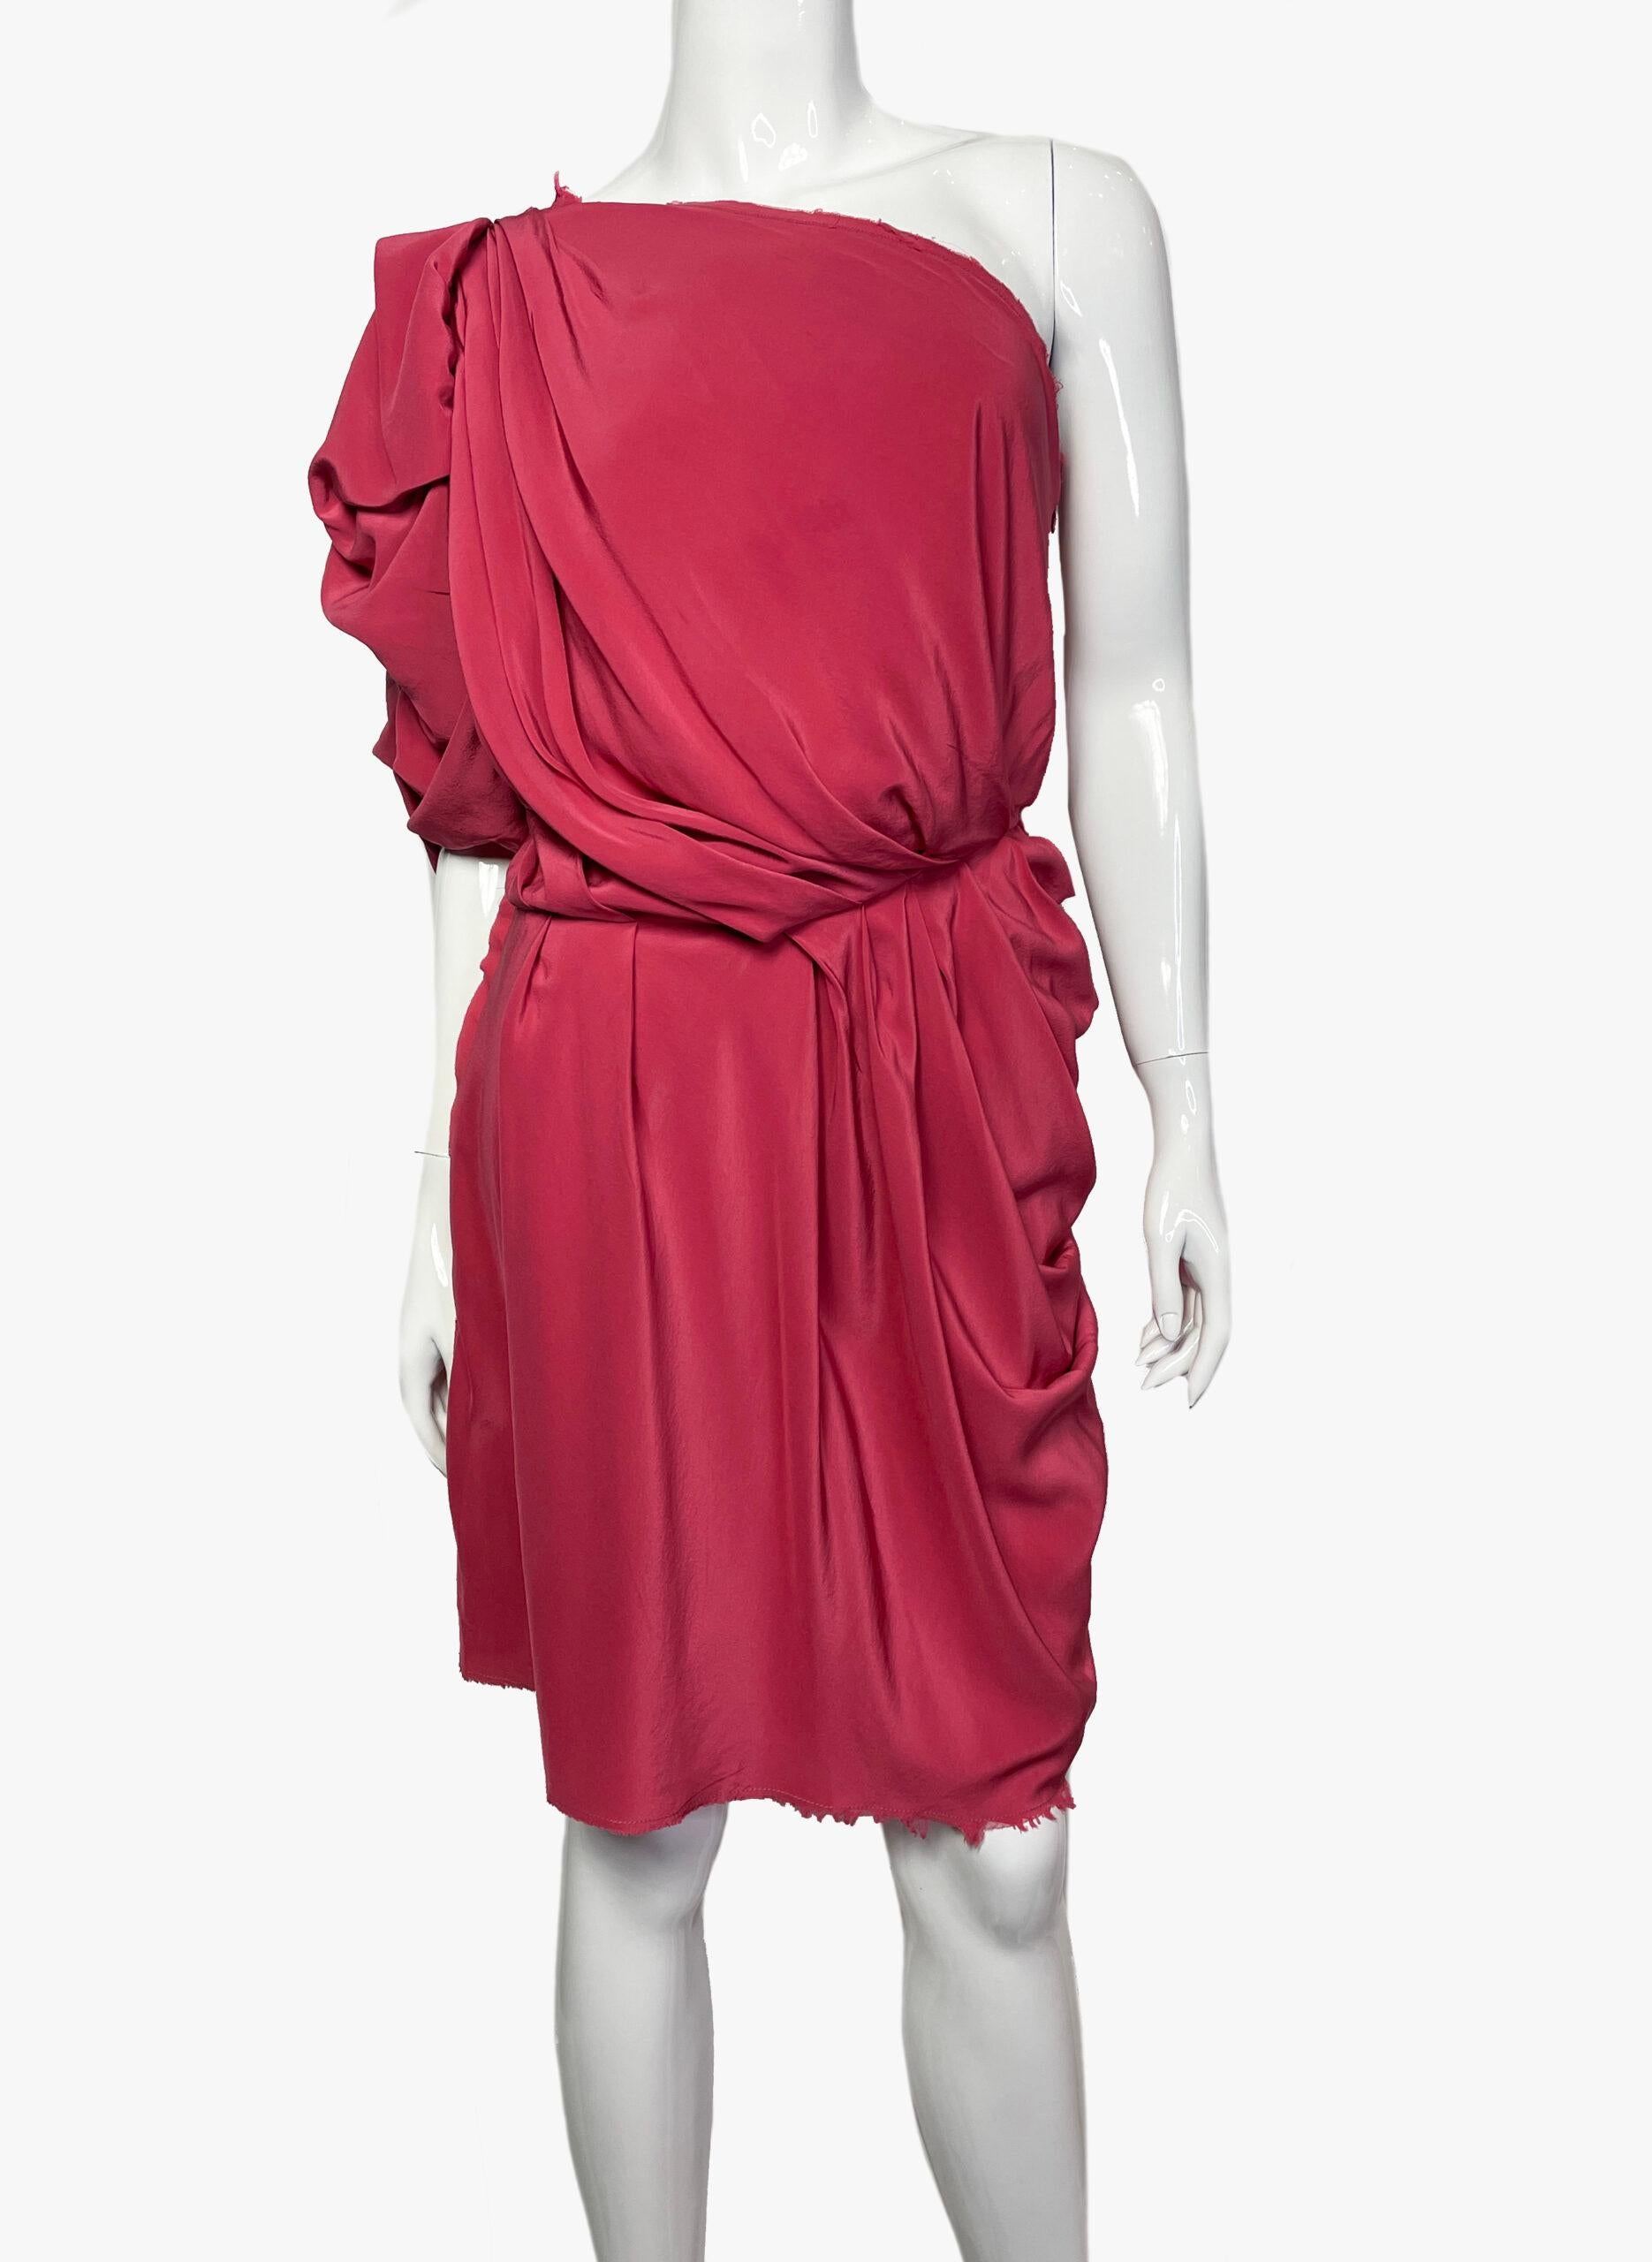 Lanvin mini draped one-shoulder dress by Alber Elbaz in red color. 
Collection 2010
Fabric: 100% silk
Size: 38 FR (M)
Condition: Perfect

........Additional information ........

- Photo might be slightly different from actual item in terms of color